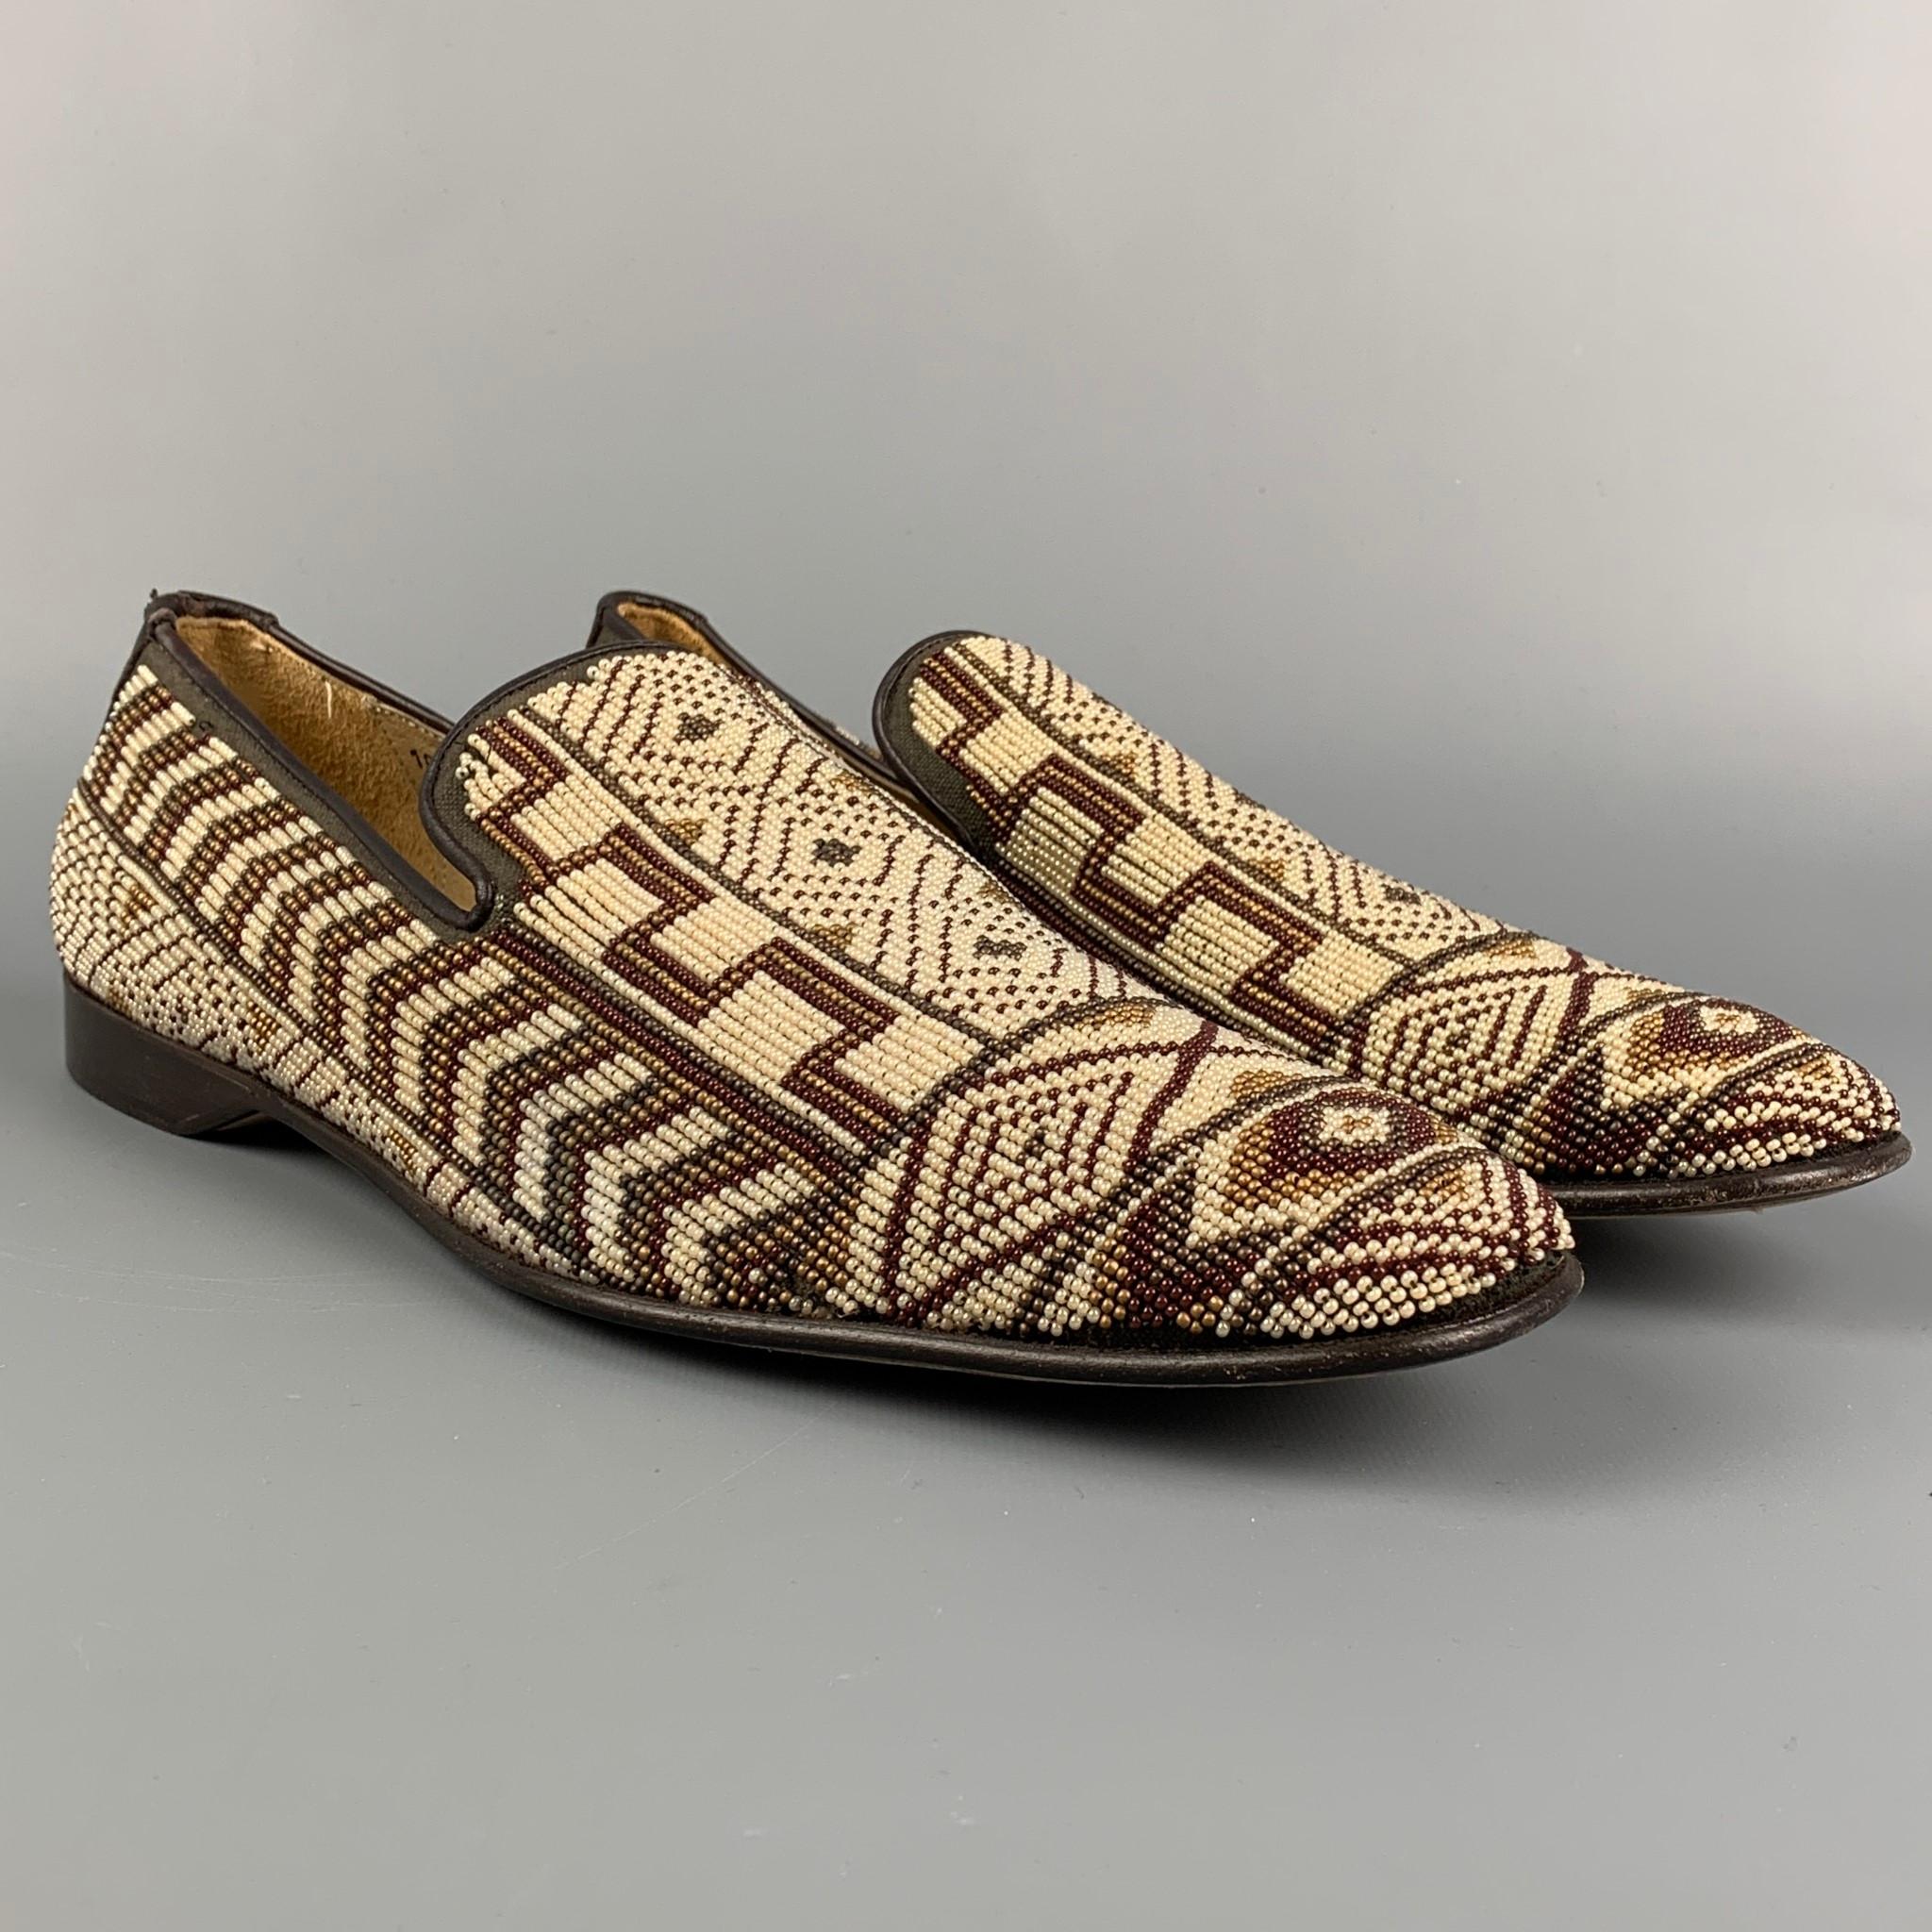 DONALD J PLINER loafers comes in a taupe & brown beaded leather featuring a square toe and s slip on style. Made in Italy. 

Very Good Pre-Owned Condition.
Marked: 10.5 M PONTSP

Outsole: 12.5 in. x 4 in. 